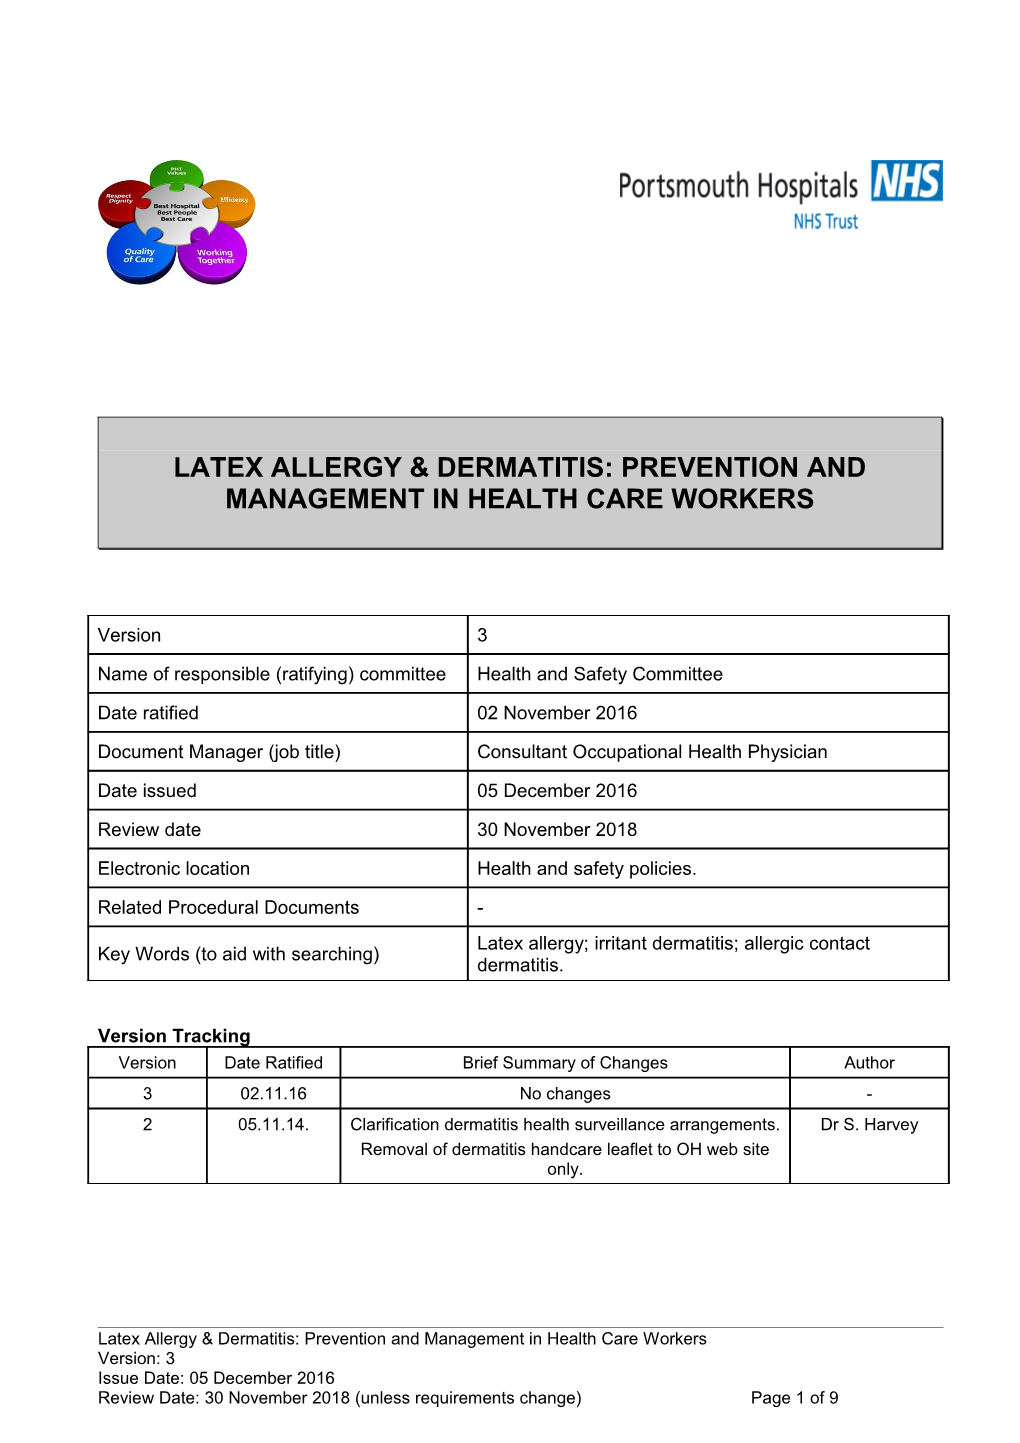 Latex Allergy & Dermatitis: Prevention and Management in Health Care Workers